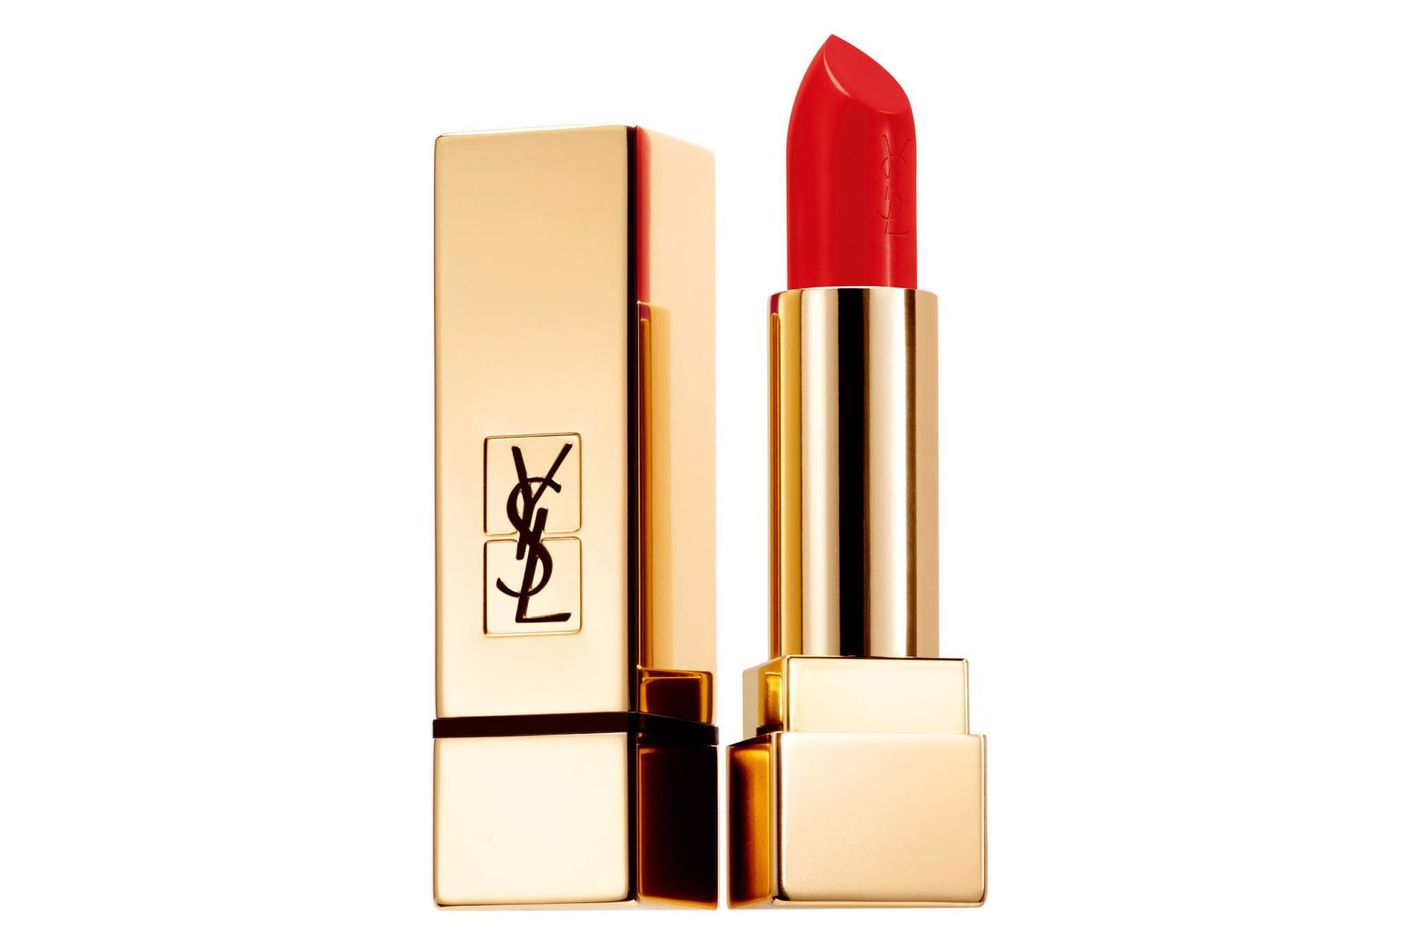 YSL Interview Tom Pecheux - YSL Beauty Skincare New Products